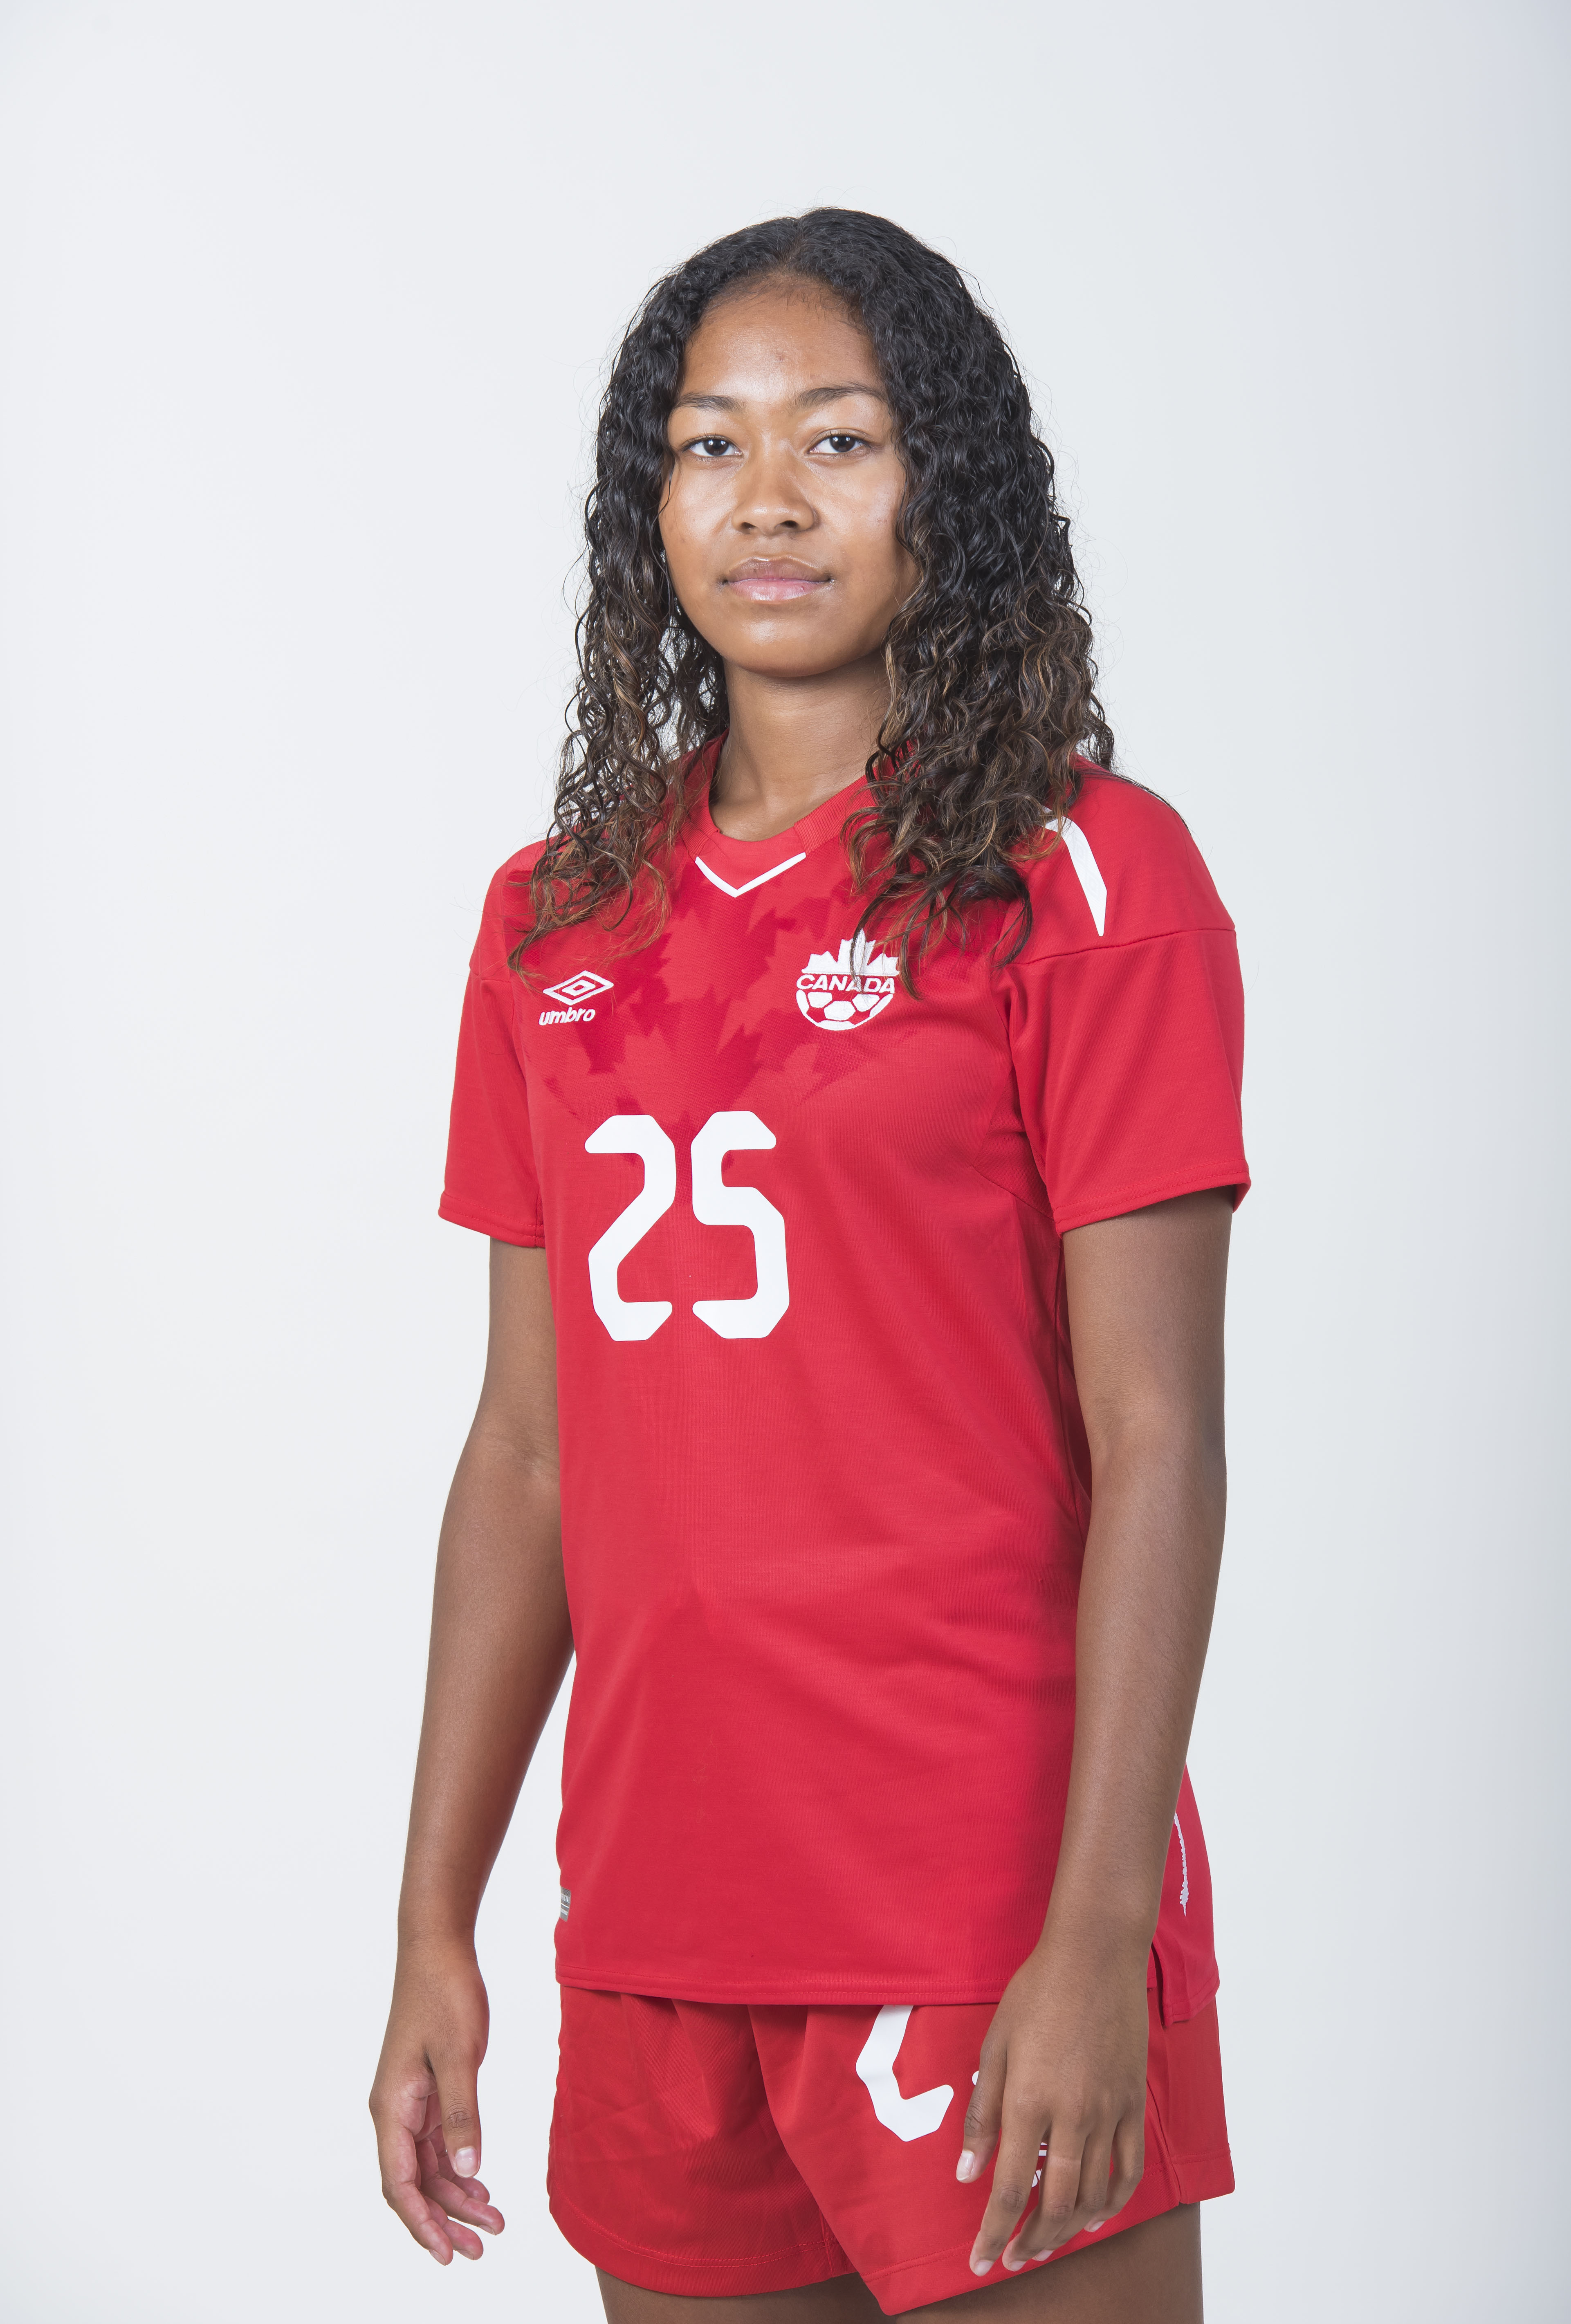 20180827_CANWNT_Riviere_byKingsman06